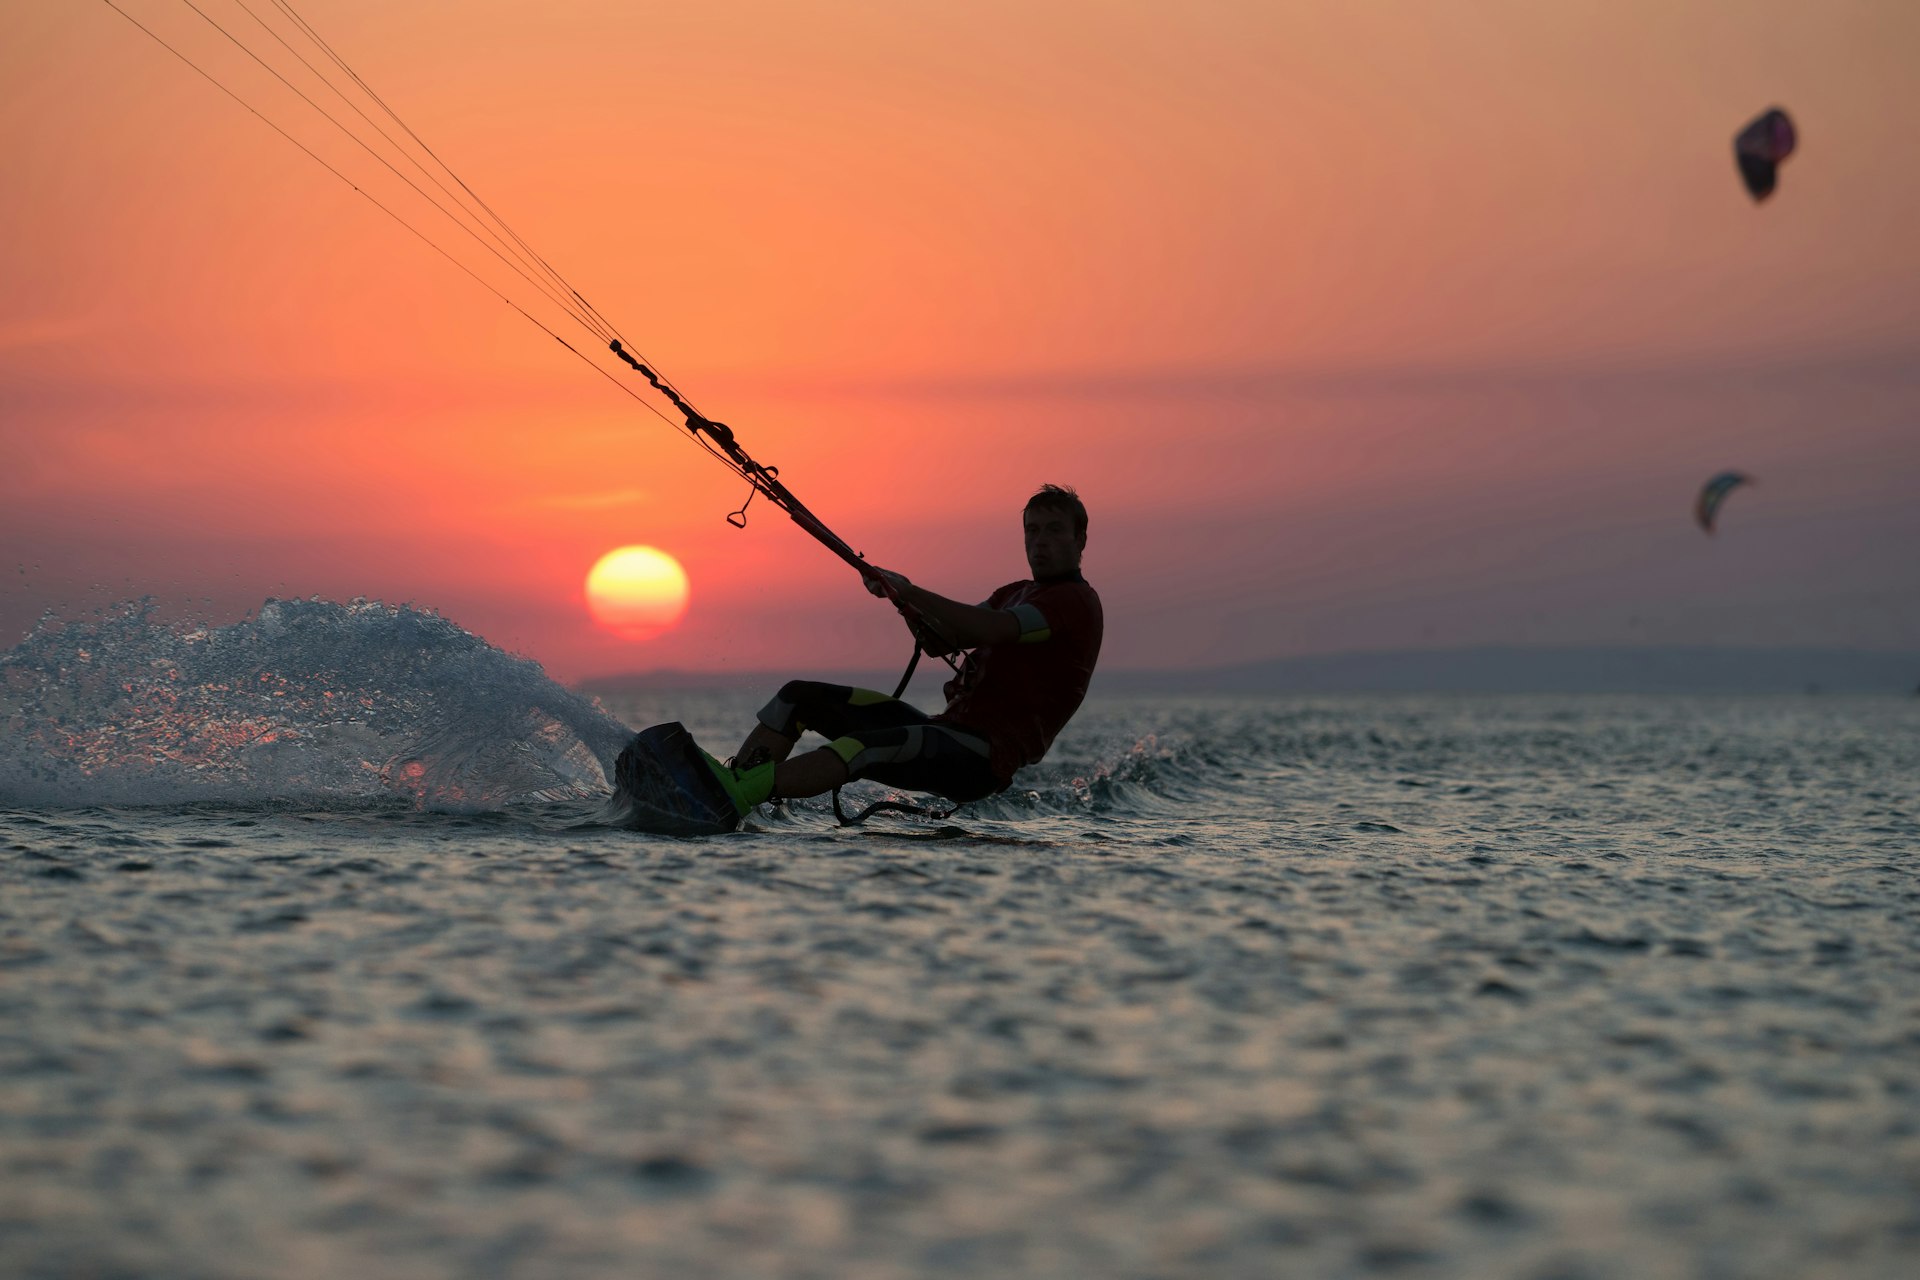 Kiteboarder at sunset off Mauritius